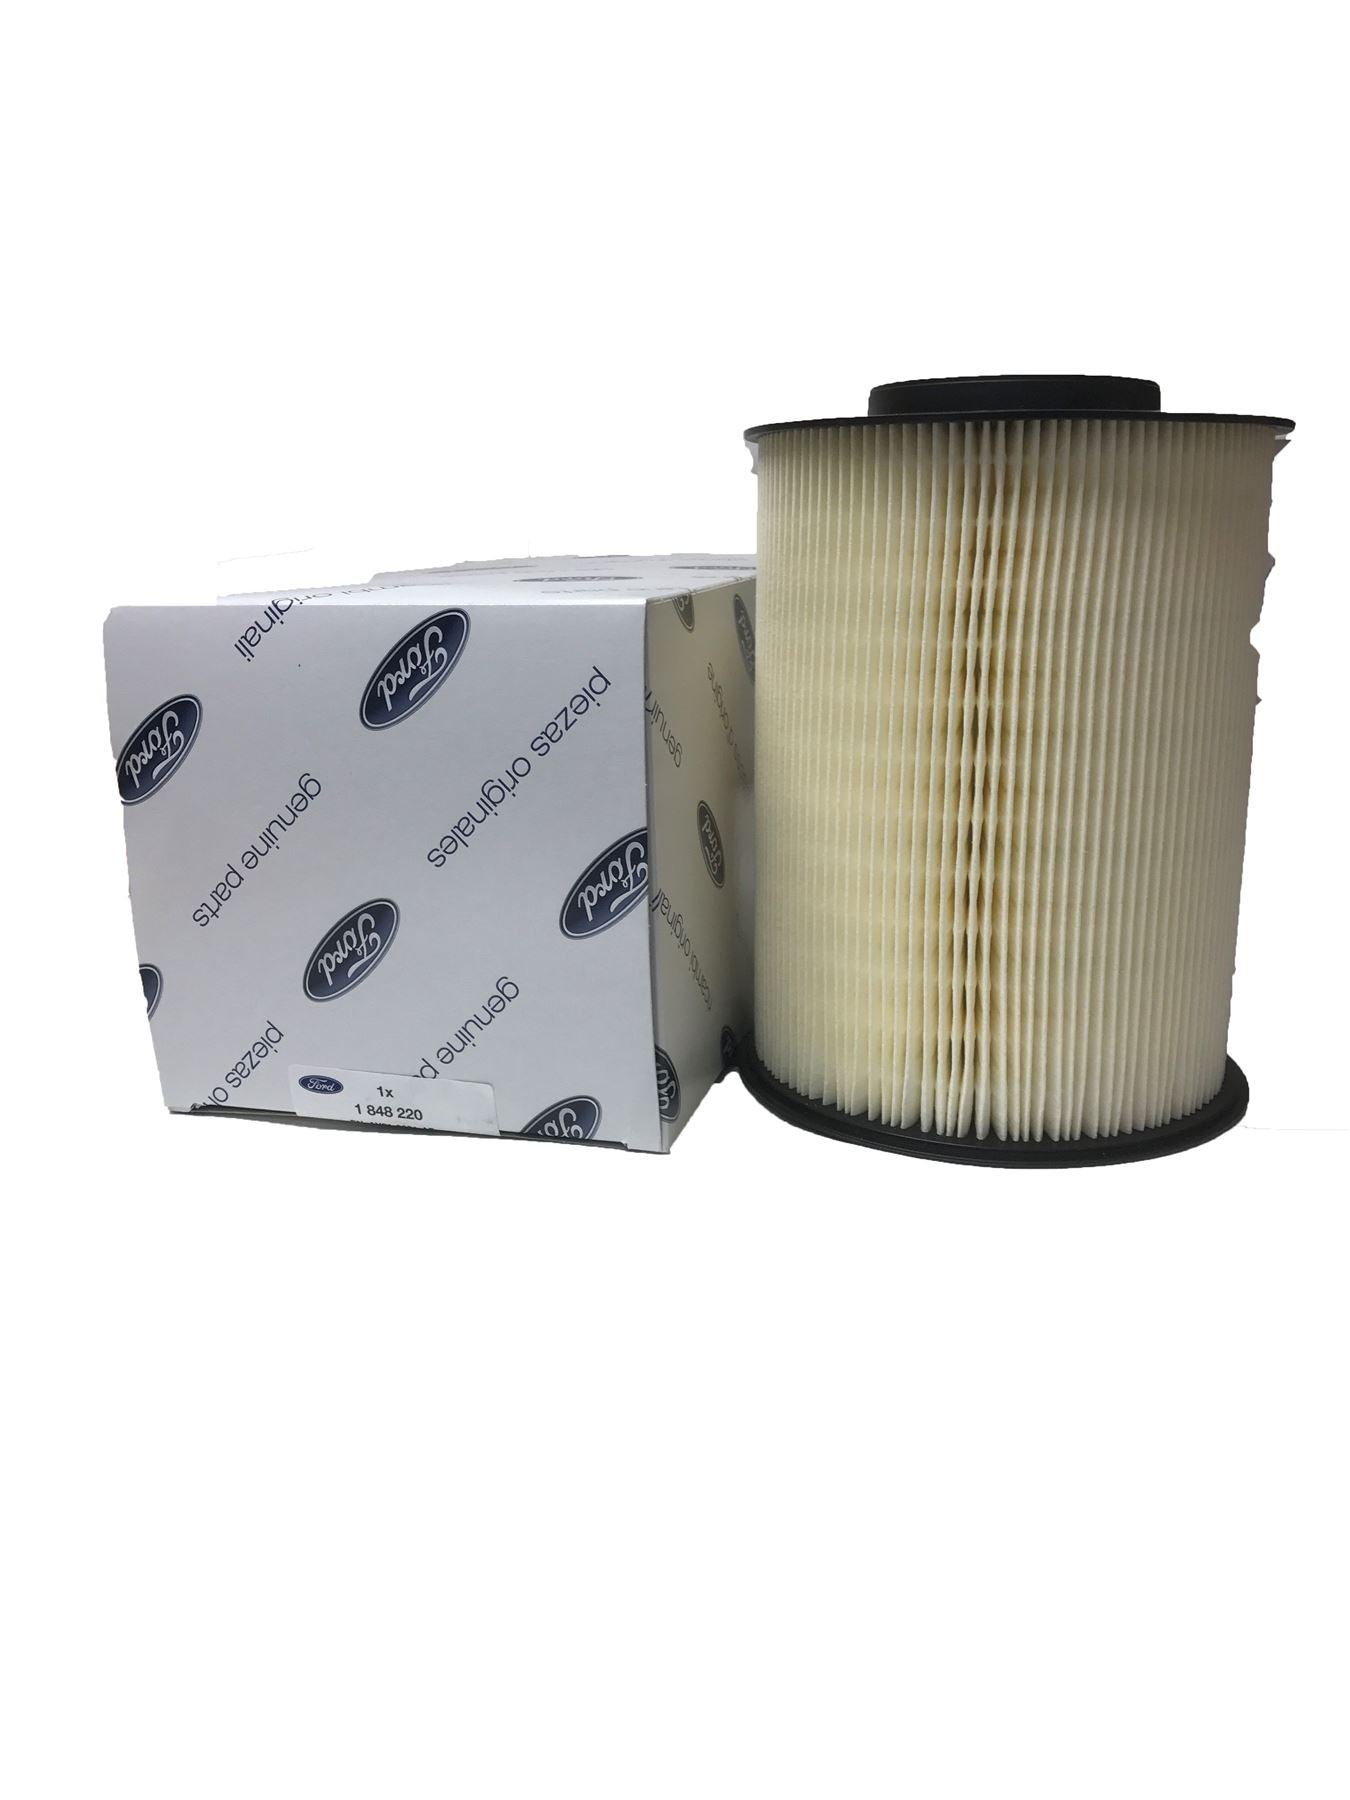 GENUINE FORD FOCUS III Saloon 1.6 EcoBoost 07.10 - 150HP ROUND TYPE AIR FILTER